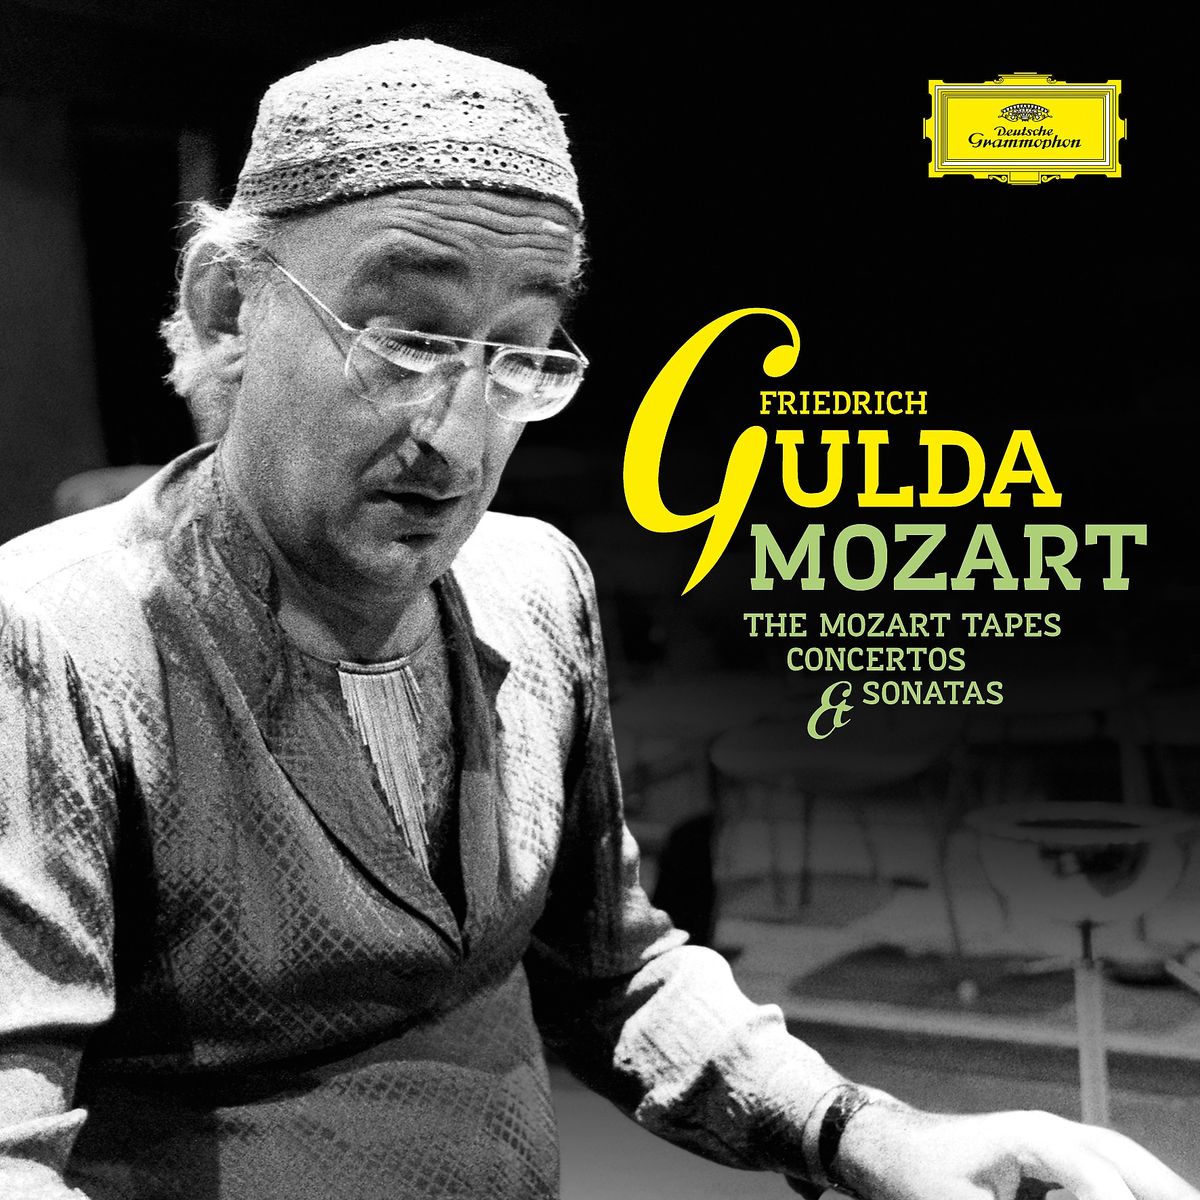 Product Family | FRIEDRICH GULDA The Mozart Tapes